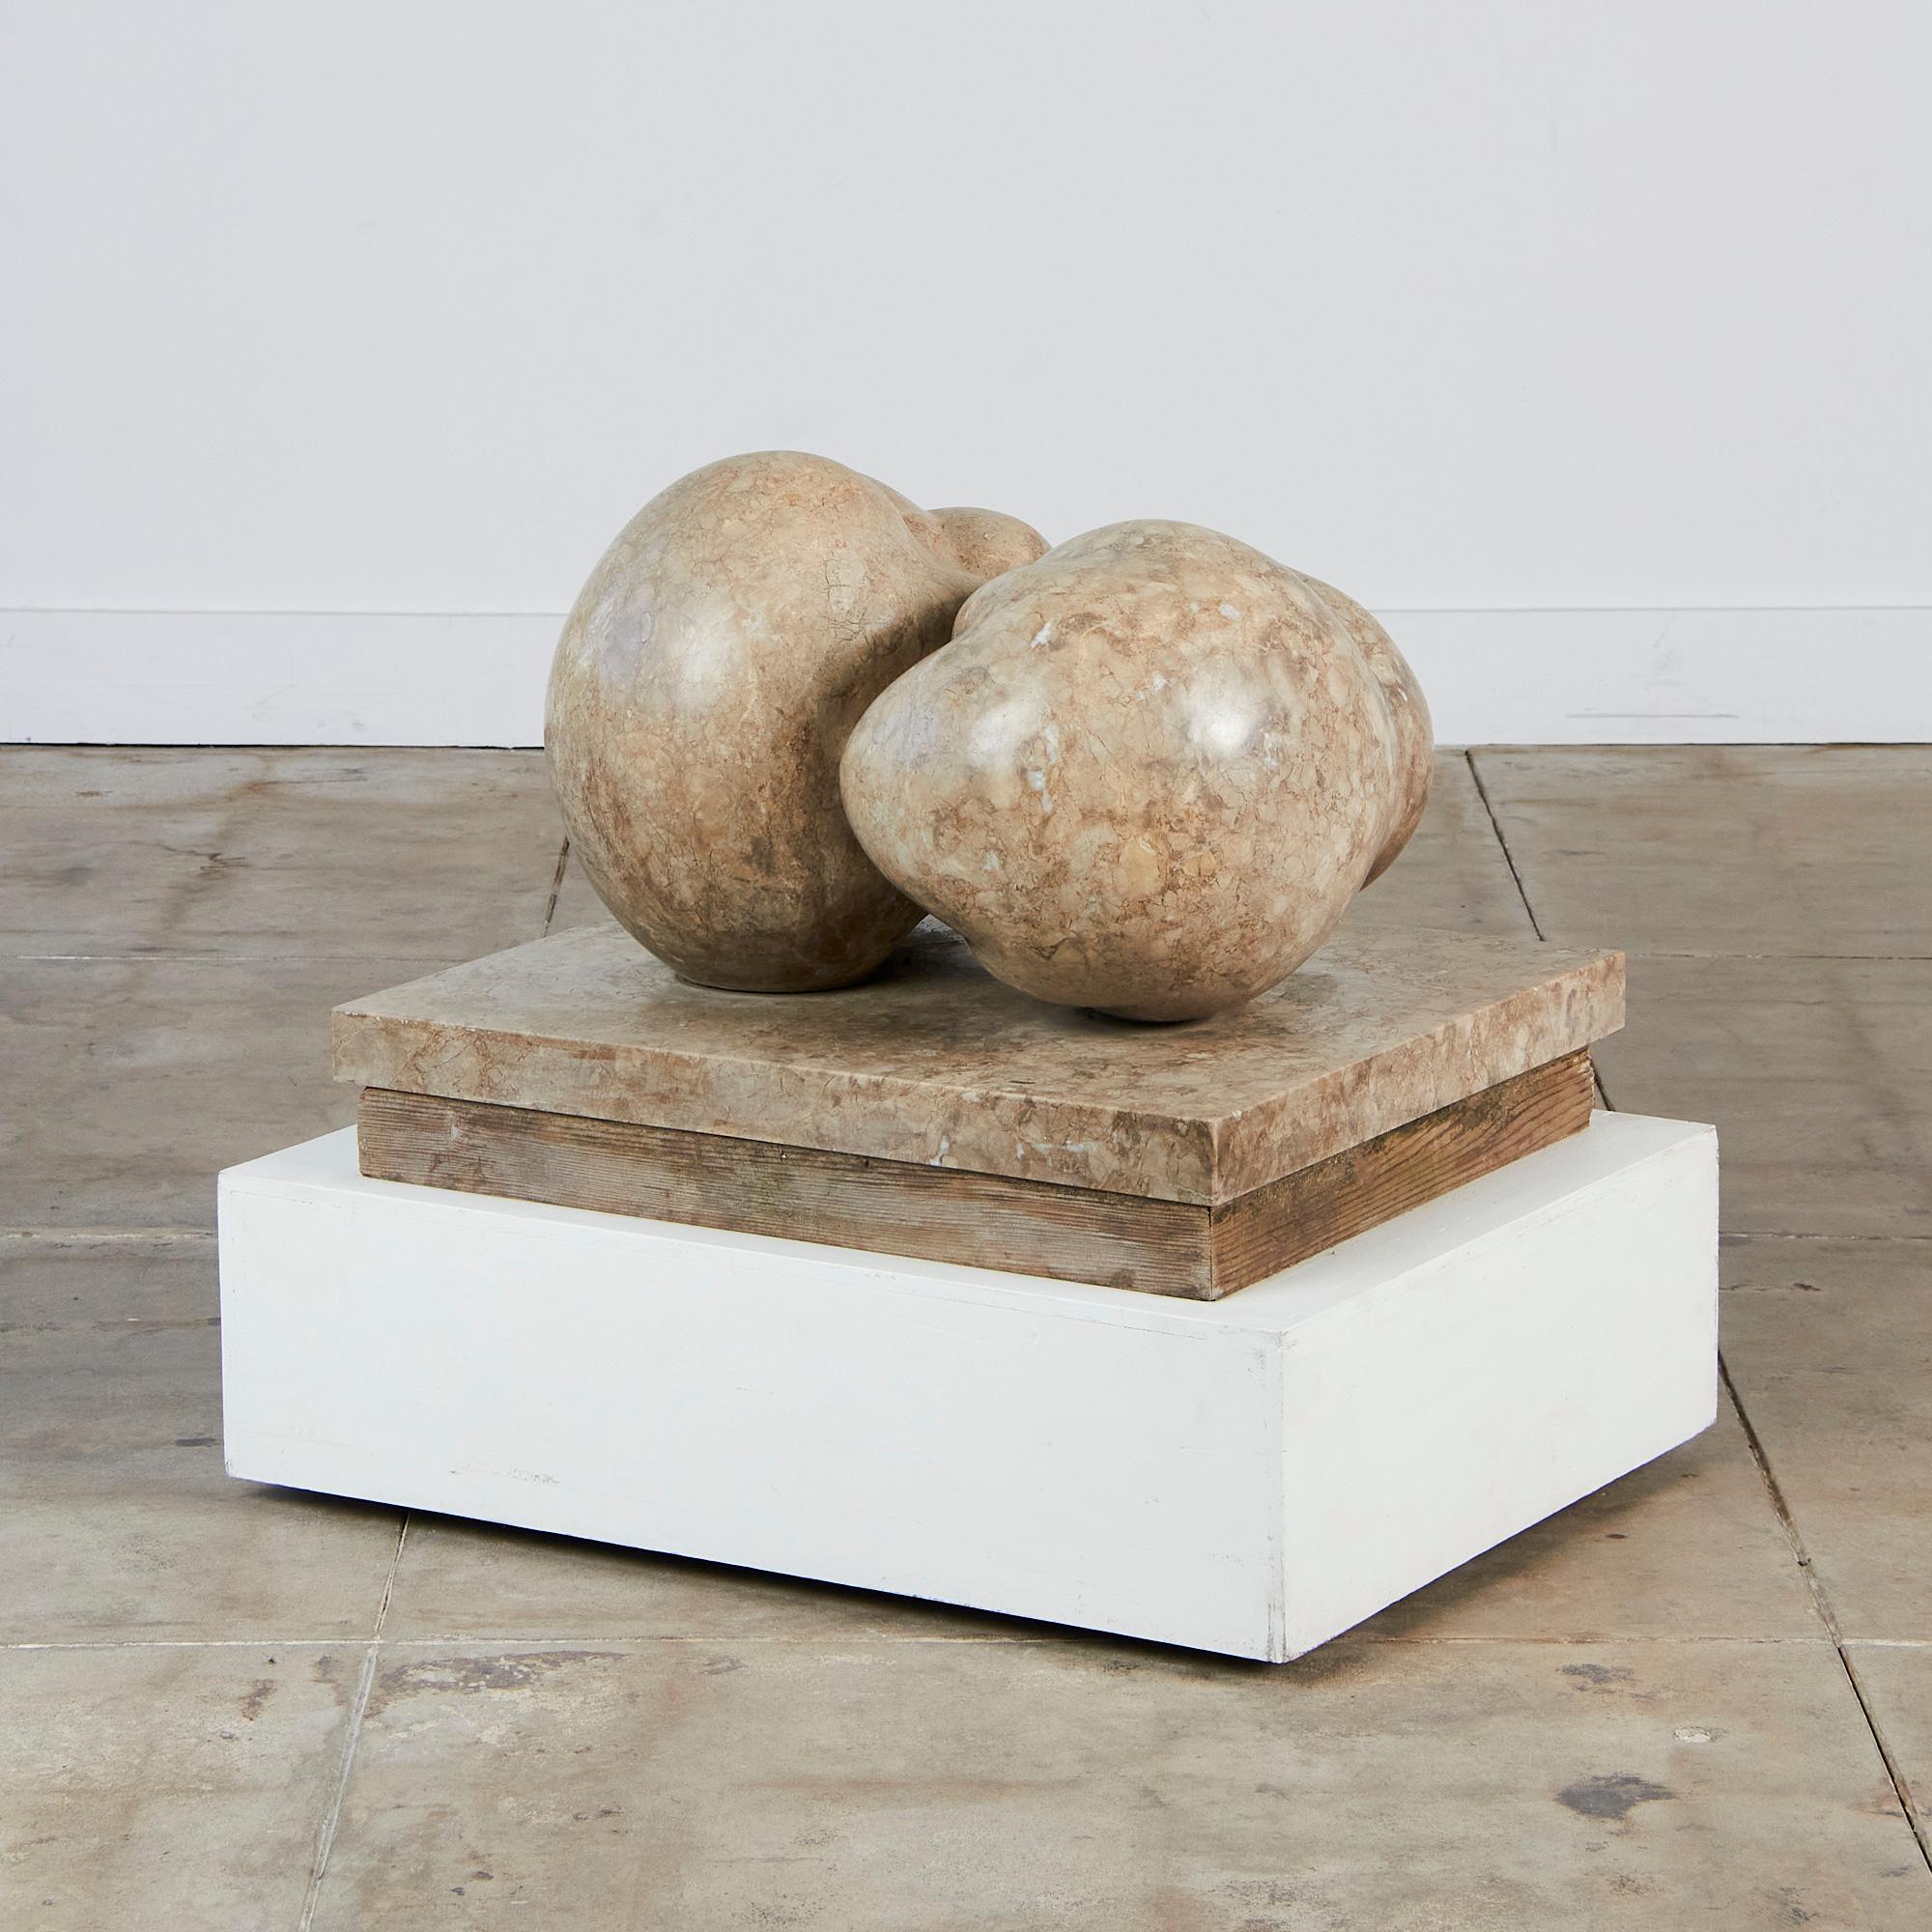 This sculpture from Amalia Schulthess is part of her Canto Series, c.1974, Los Angeles. The casting exhibits a fruit-breast style, displayed on a low platform, resembling giant spilled fruit. We can't help but see an heirloom tomato. 